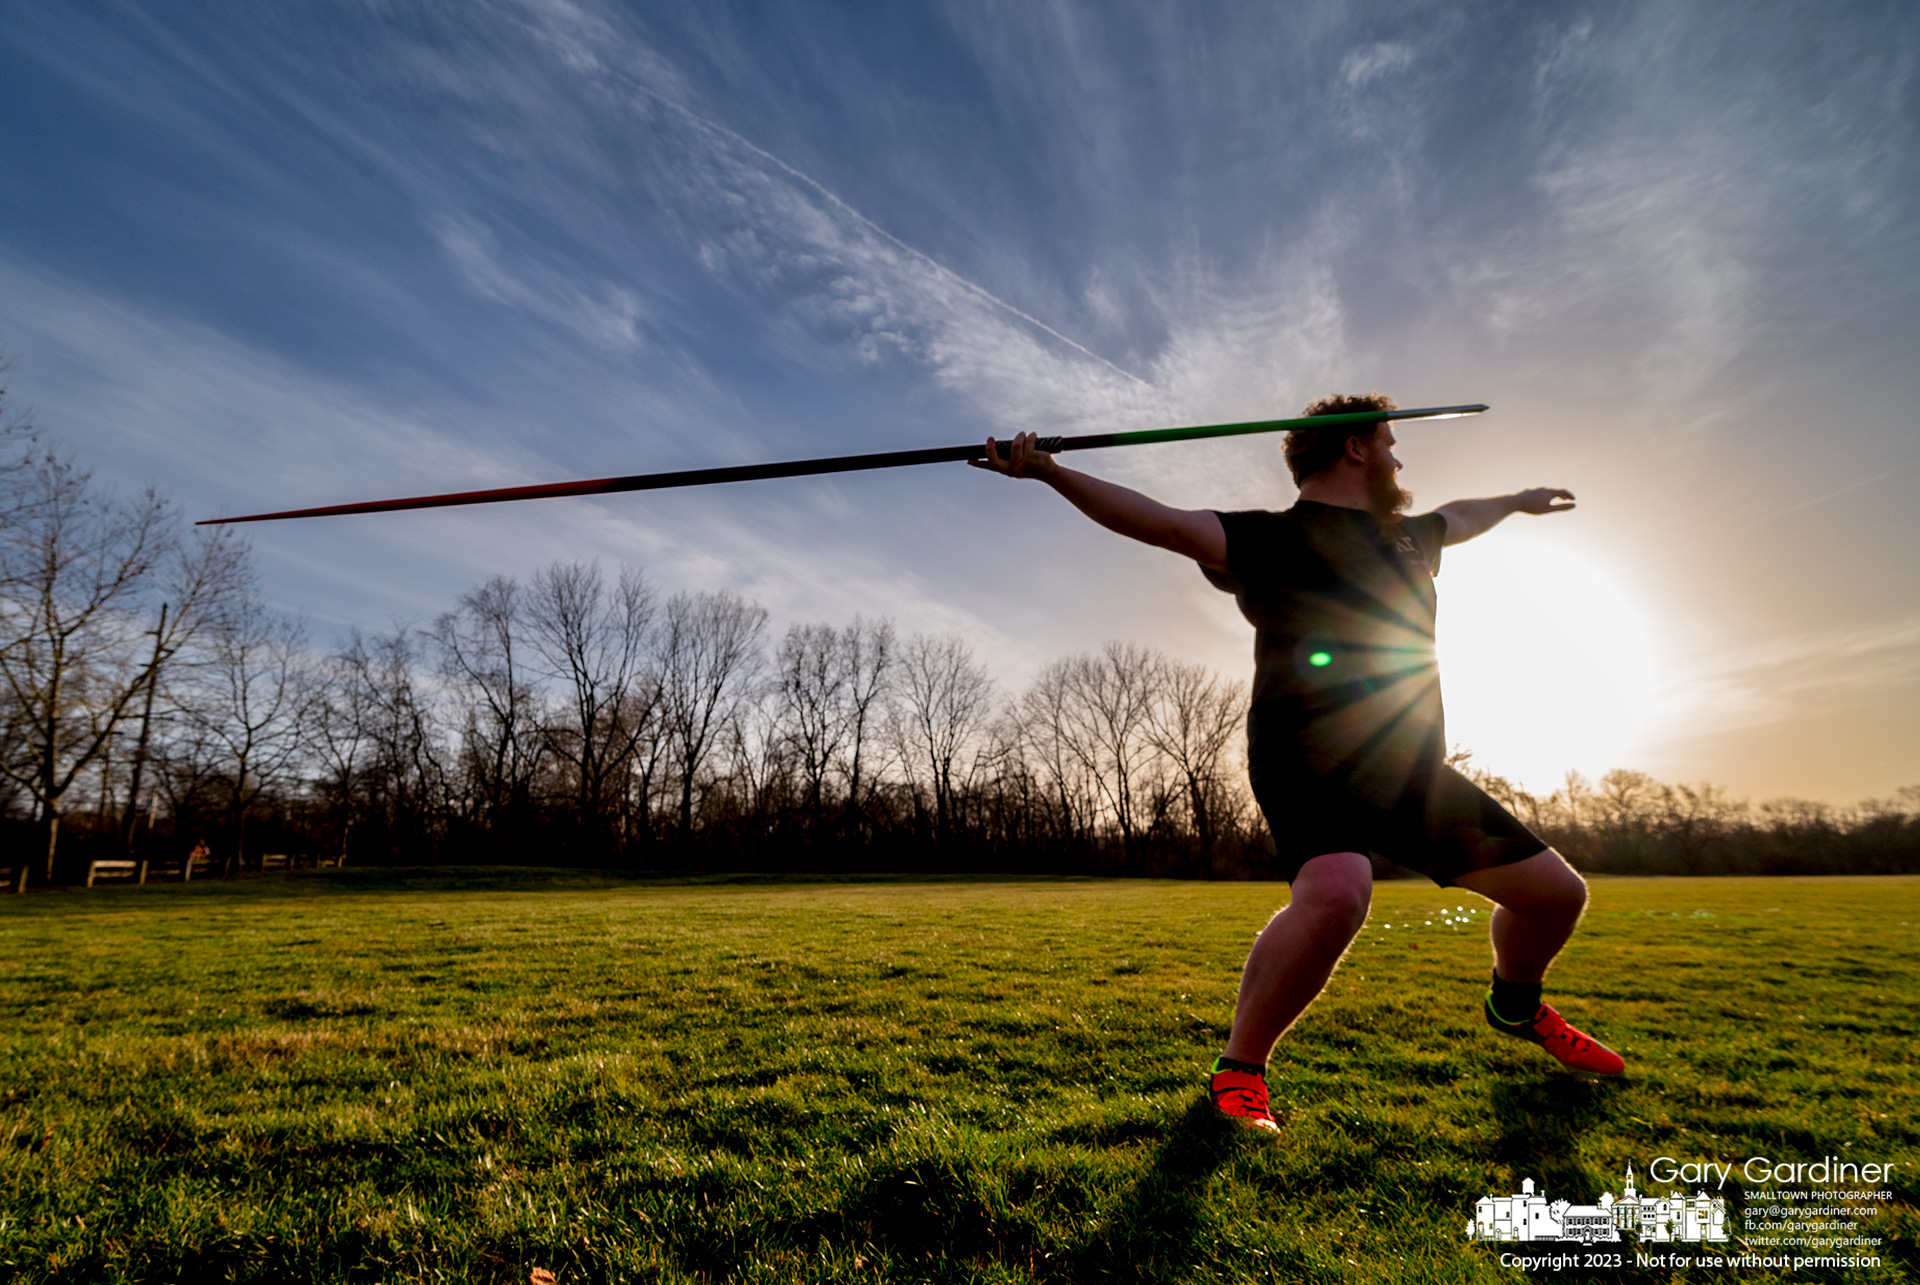 Otterbein University athletes take advantage of the warm weather to get in a javelin-throwing training session at their athletic field on North West Street. My Final Photo for February 15, 2023.